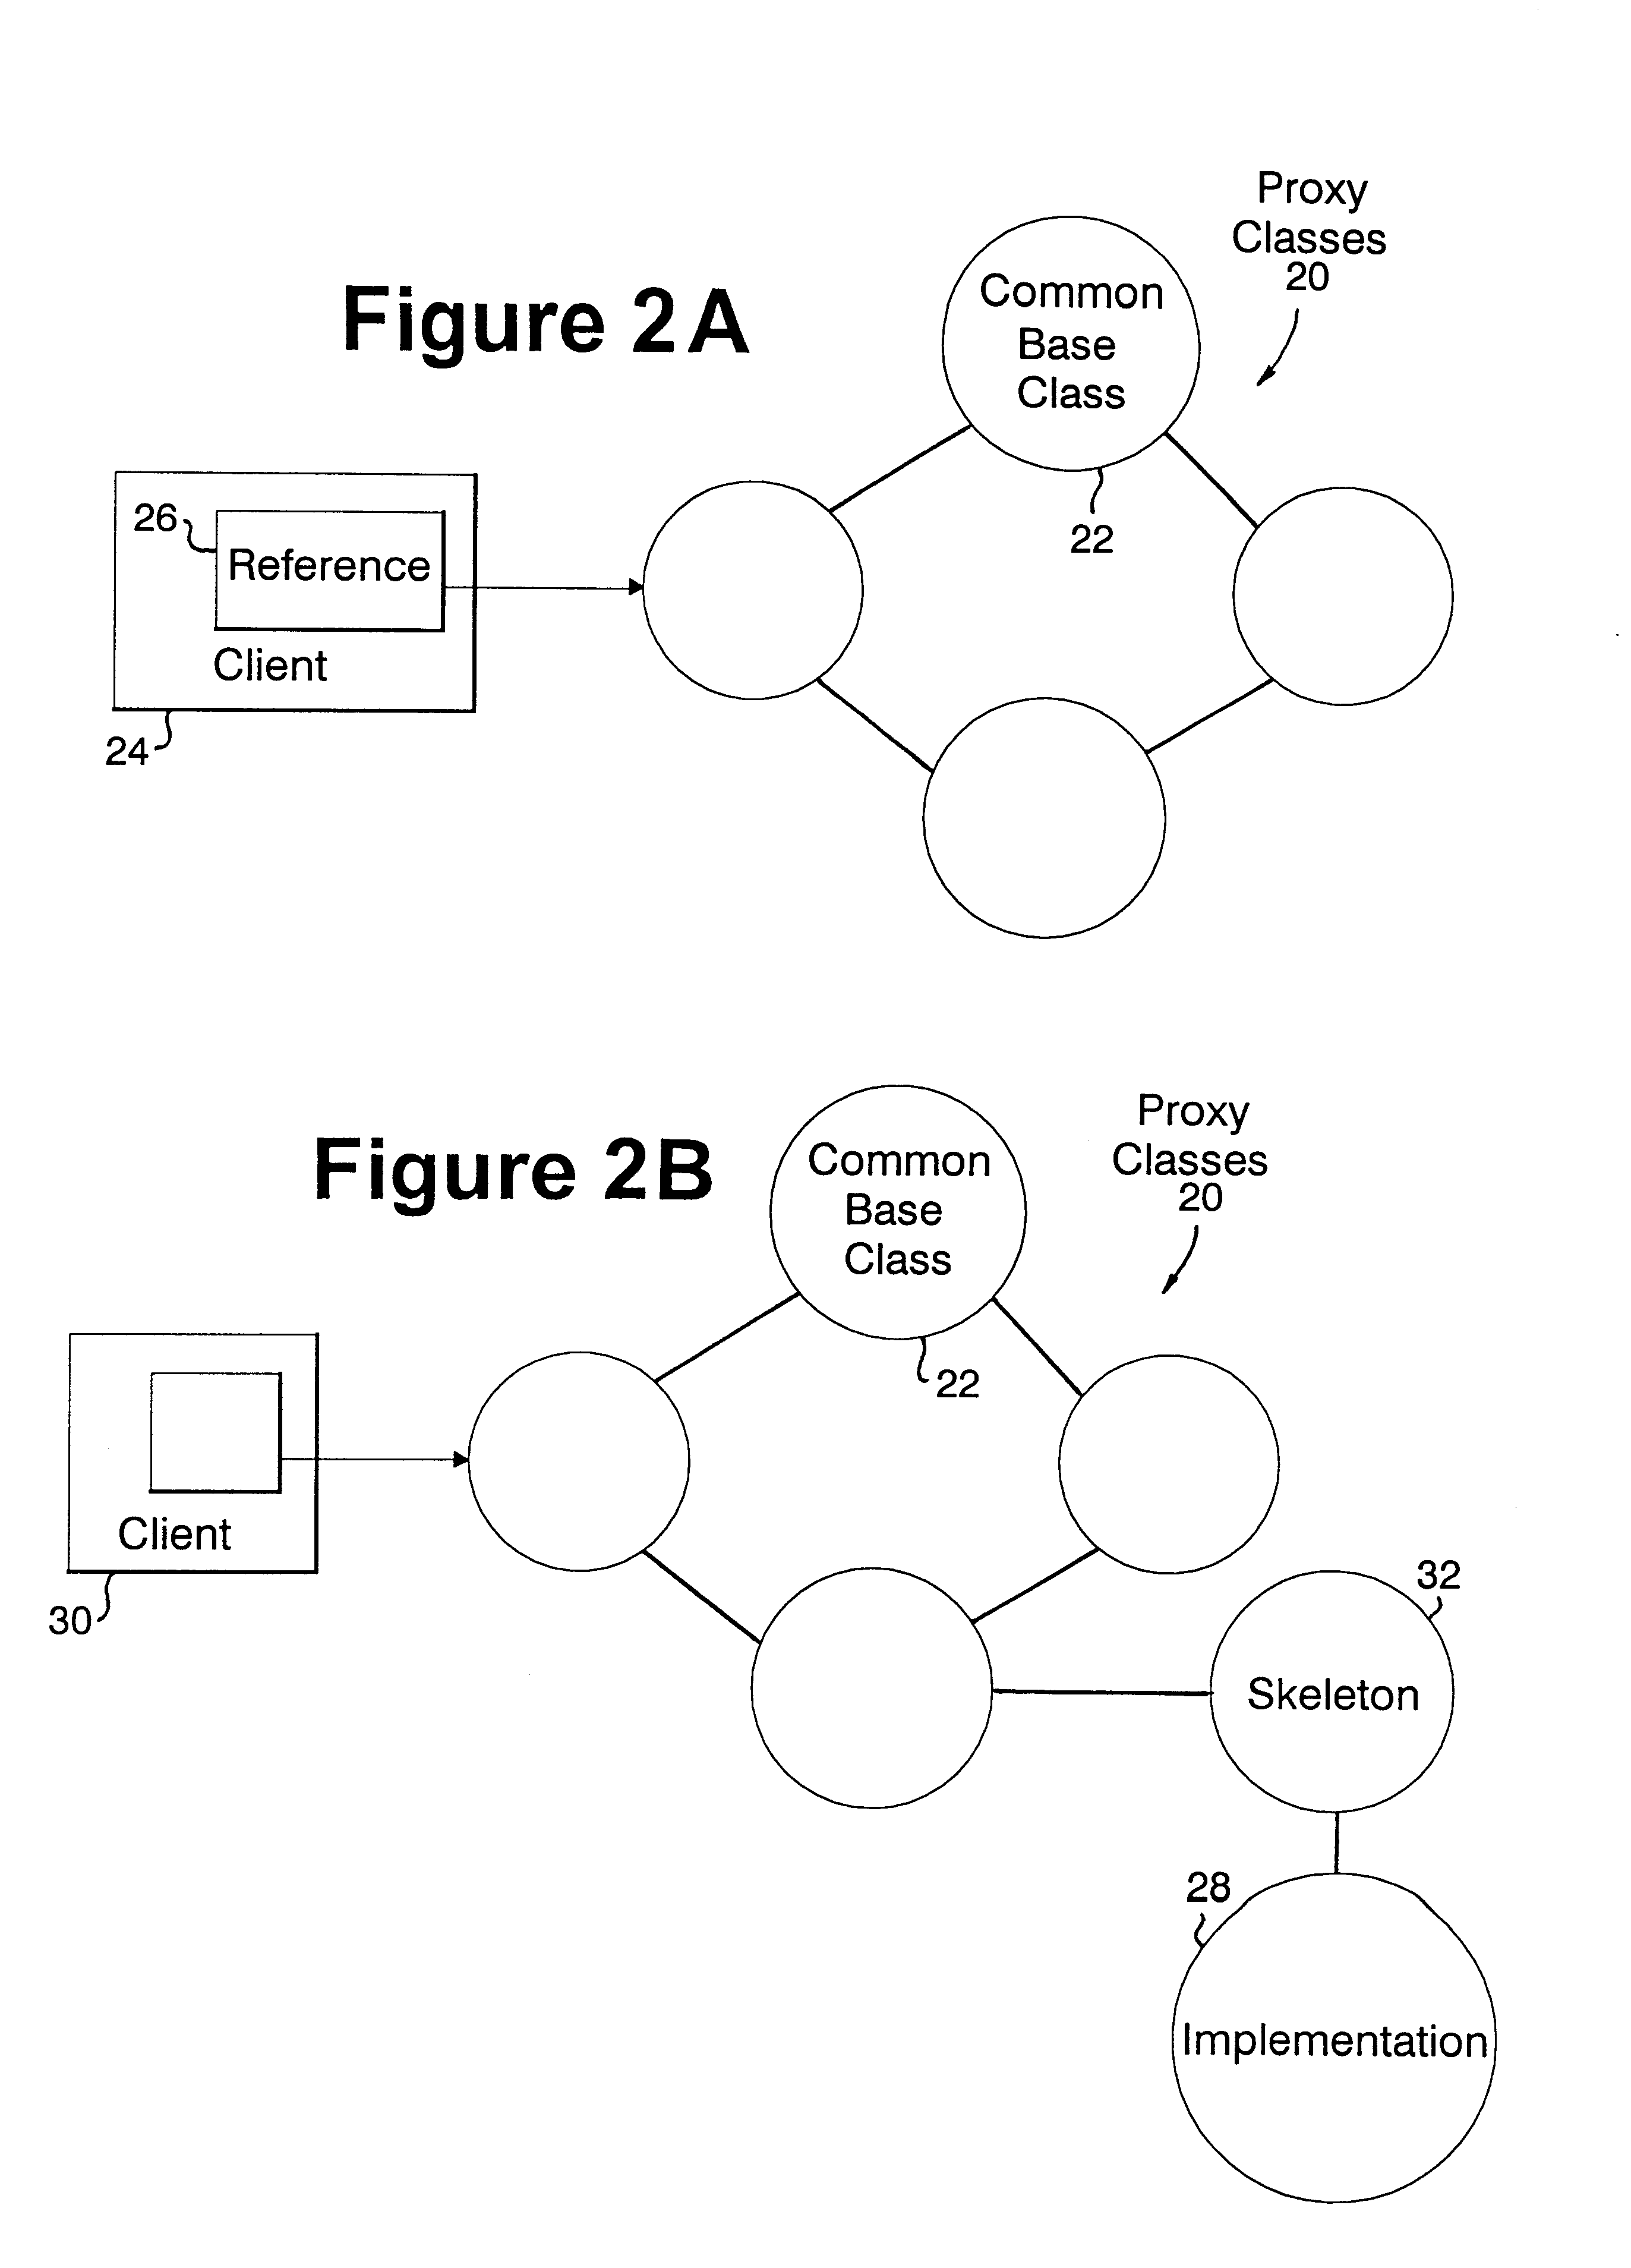 Uniform access to and interchange between objects employing a plurality of access methods